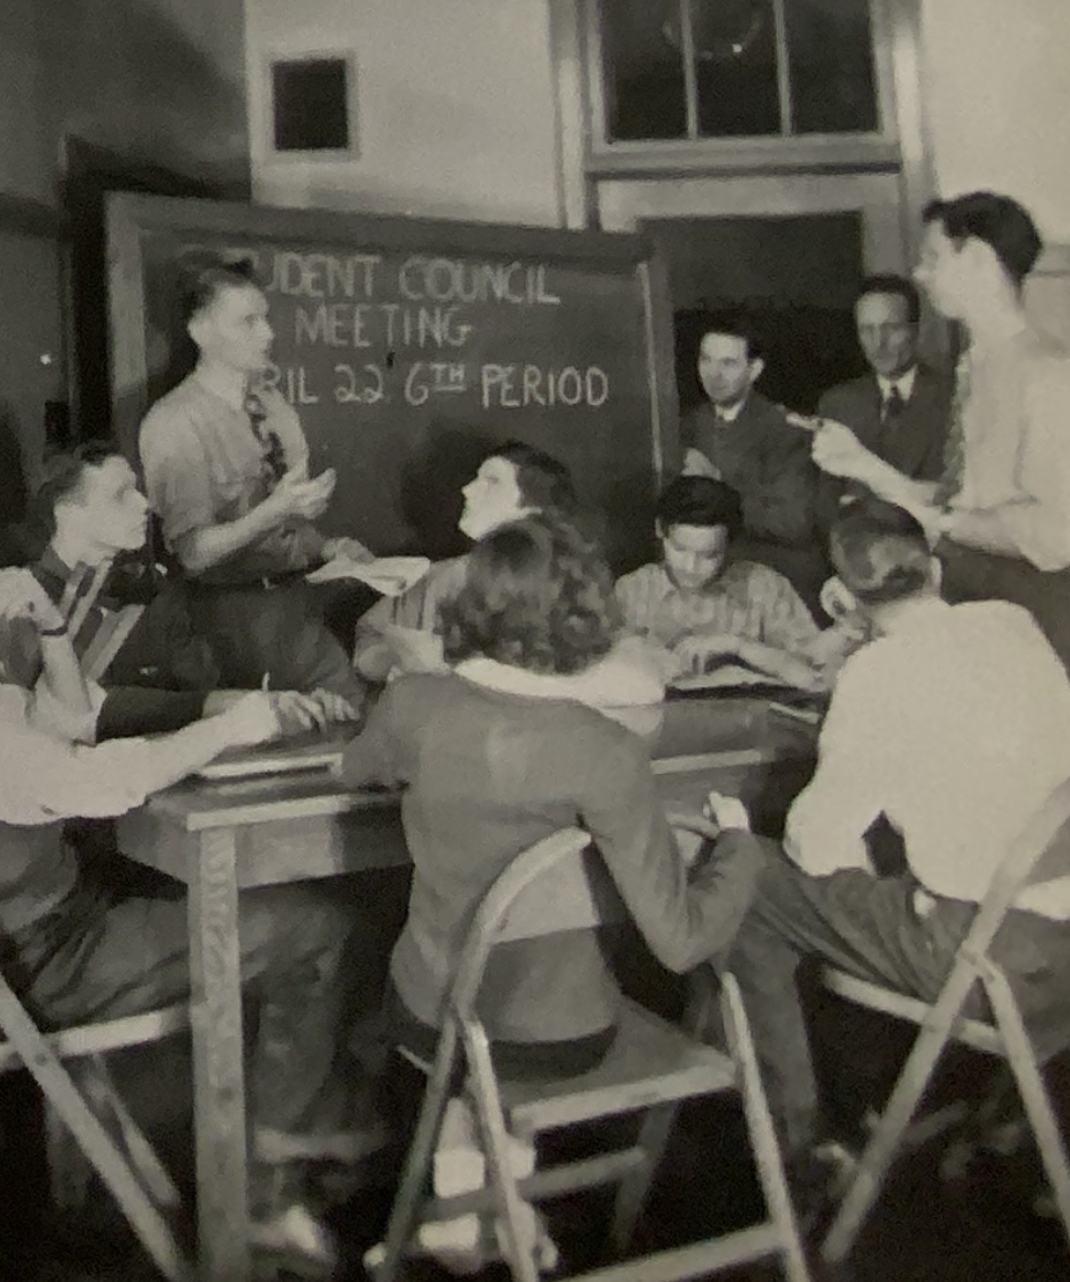 students sit around a desk and talk. Behind them, a chalkboard reads: student council meeting 6th peroid.